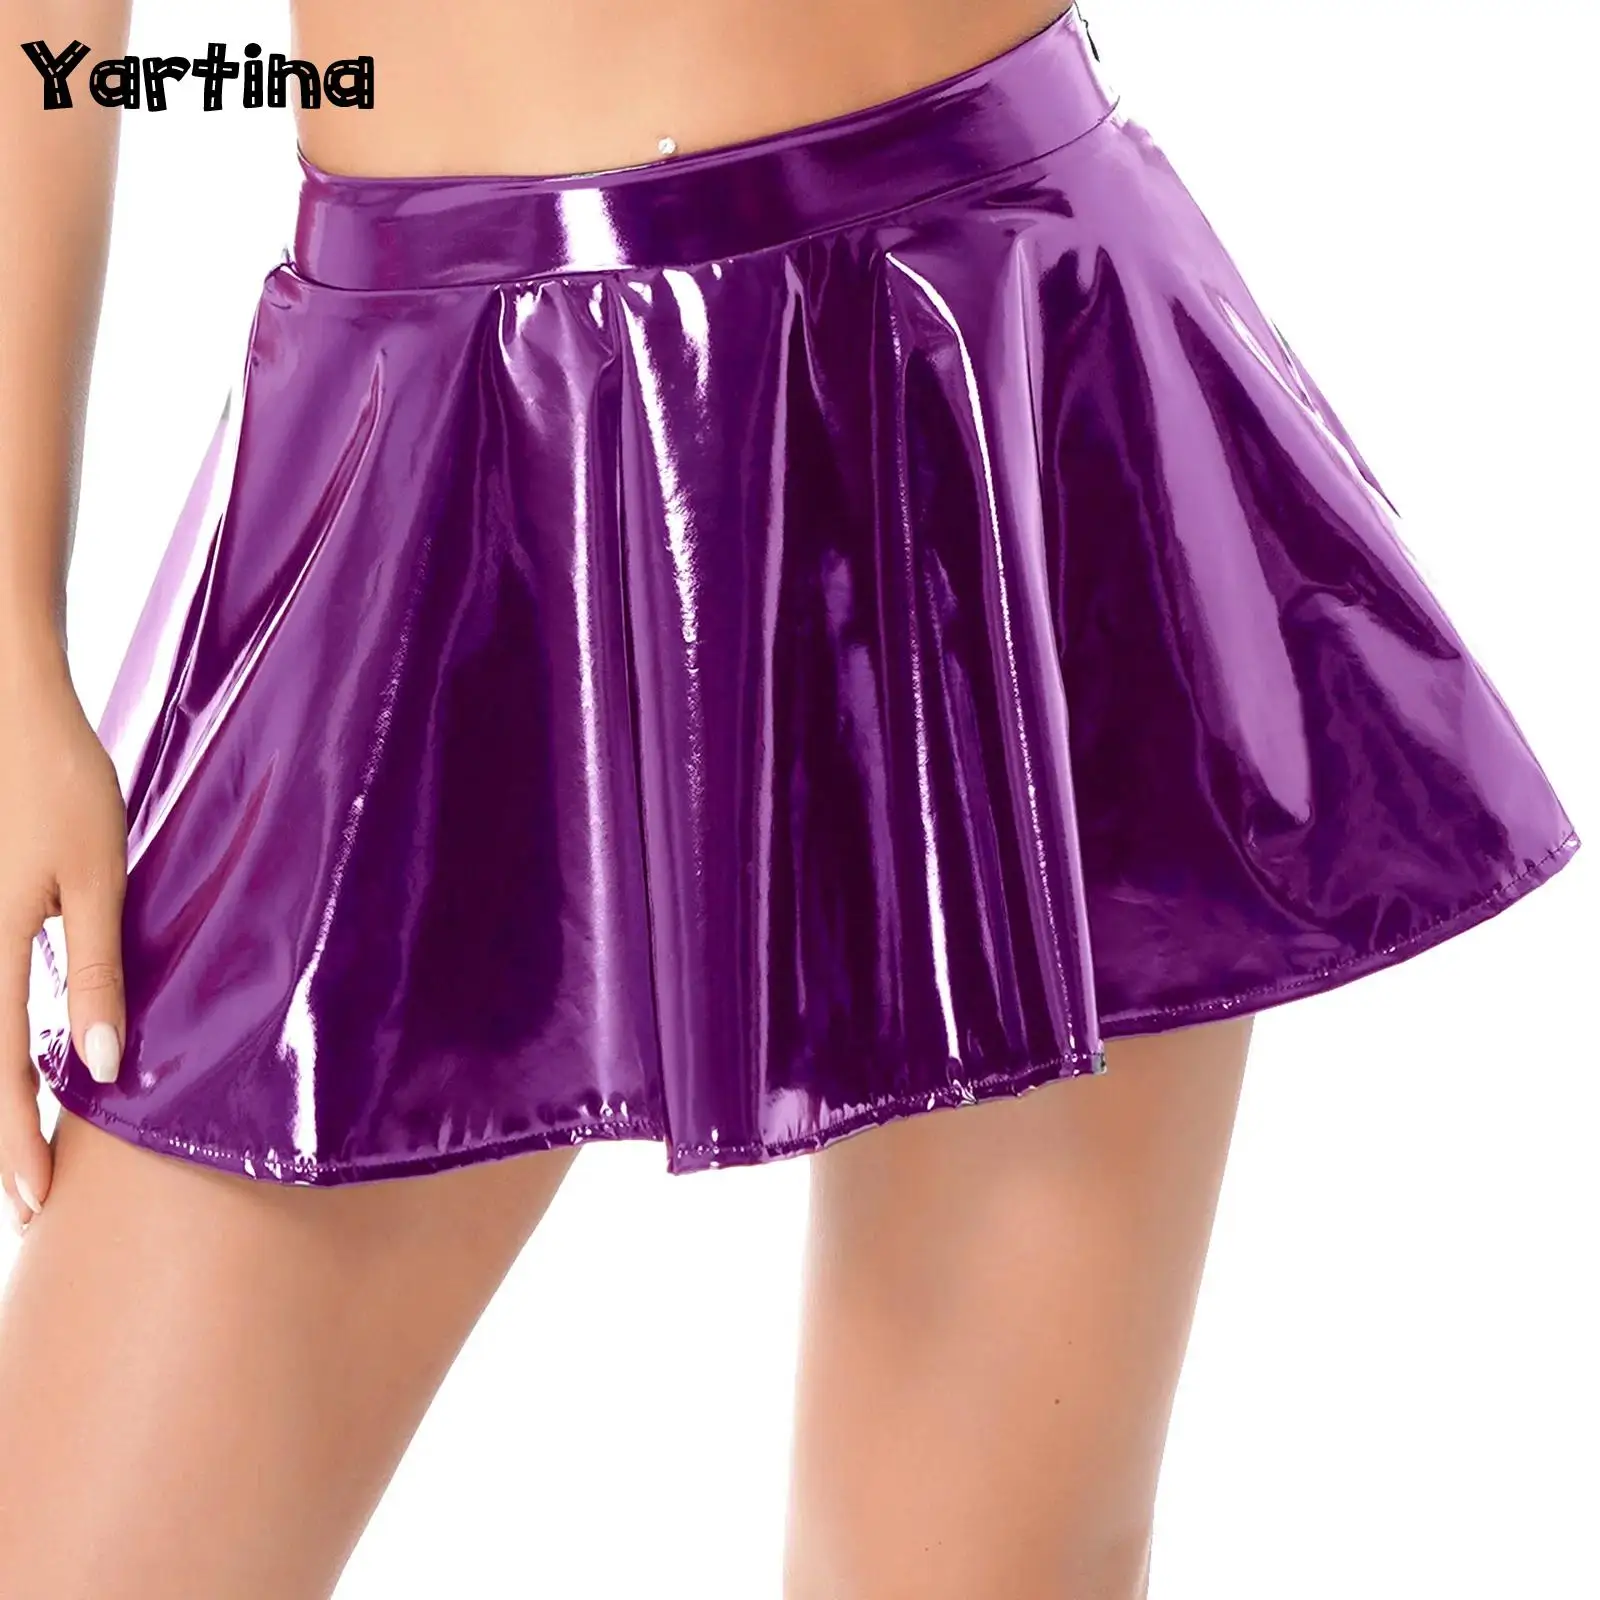 

Womens Glossy Patent Leather Flared Mini Skirt Club Dance Performance Invisible Zipper A-Line Mini Skirts Rave Bar Party Costume